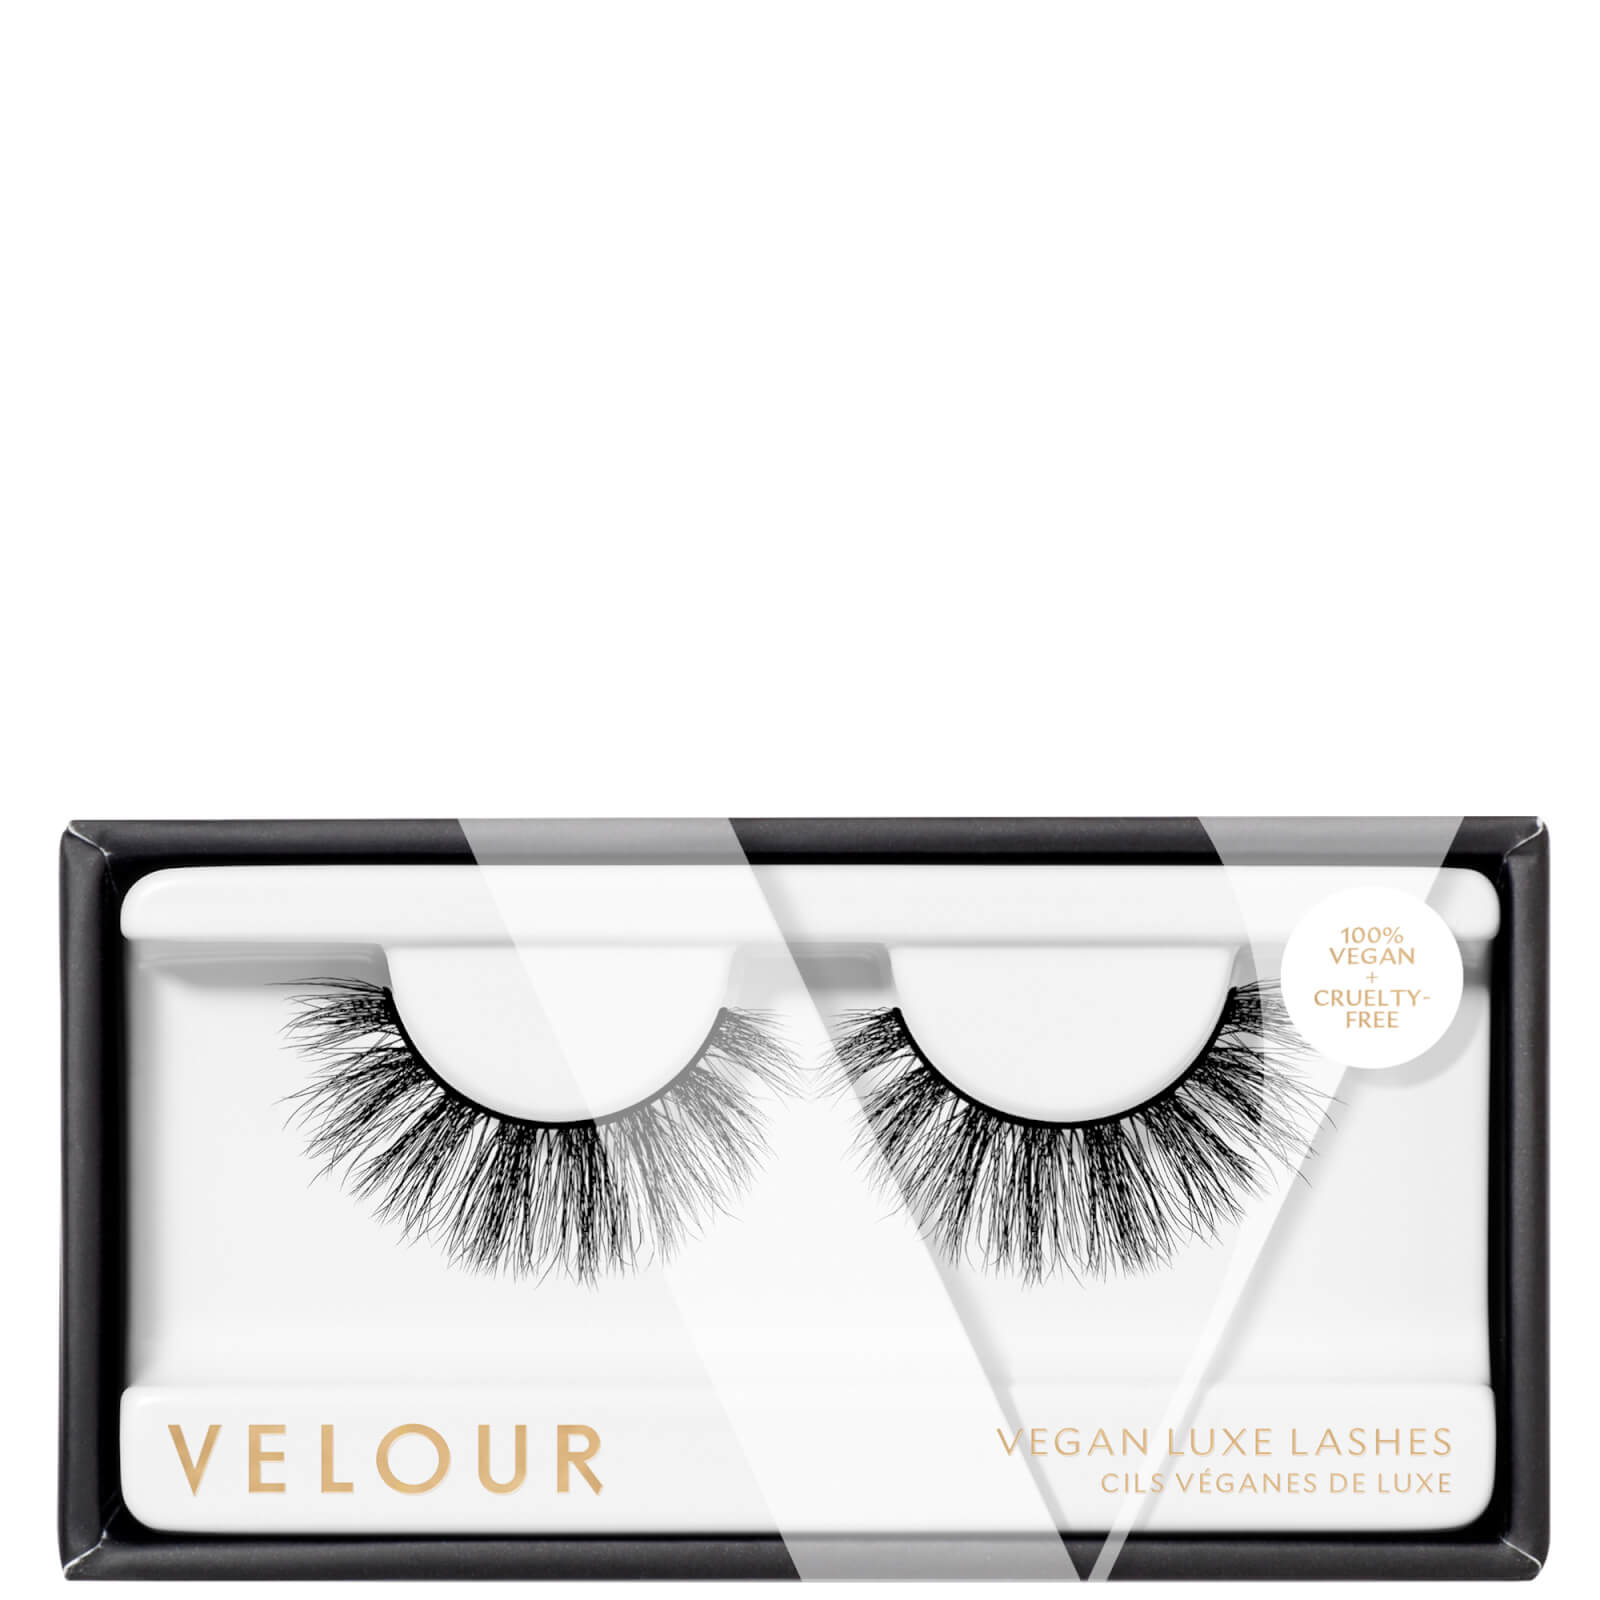 Velour Lashes Vegan Luxe Whispie Sweet Nothing Lashes